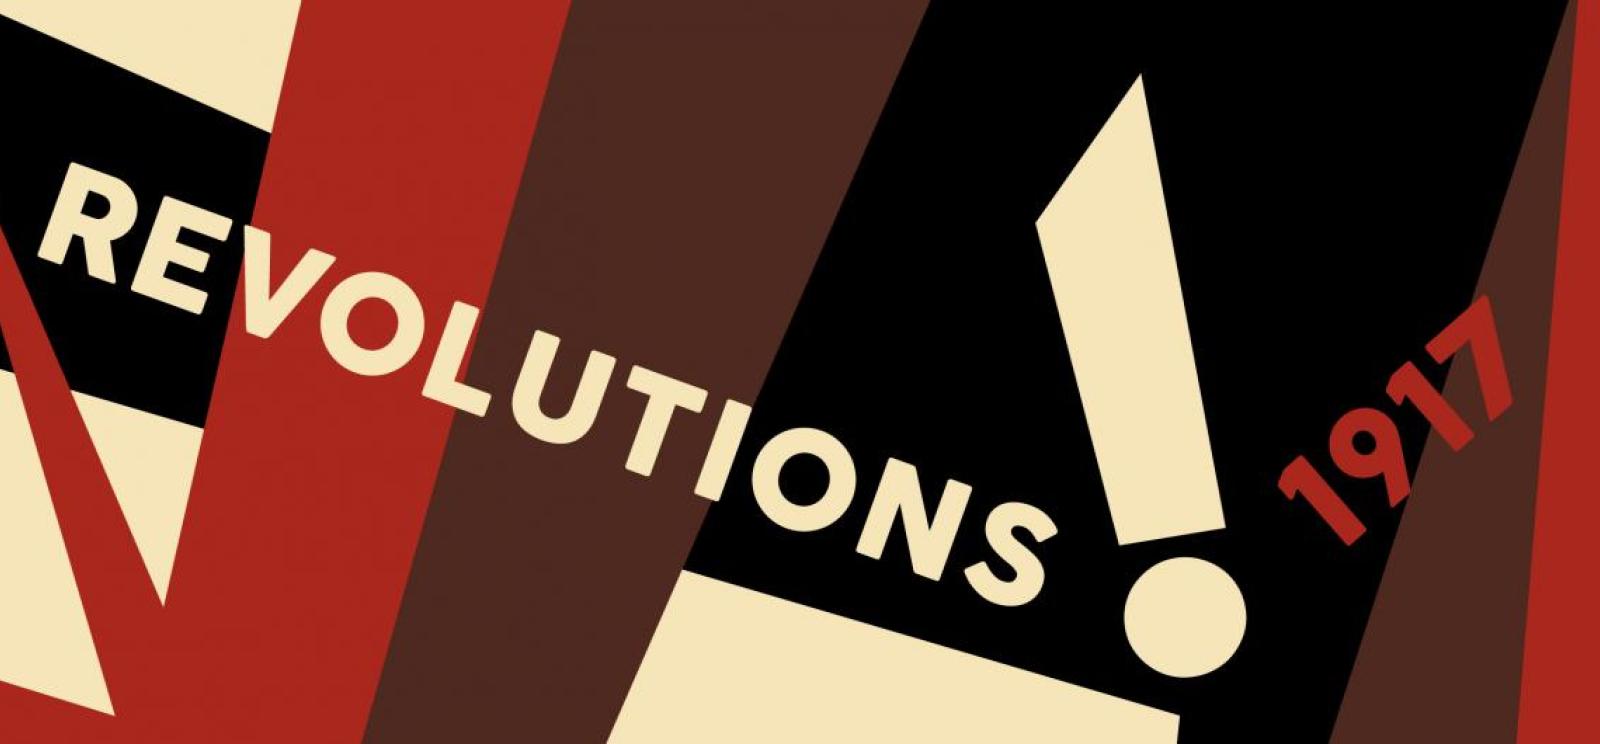 Background: red, brown and cream angular shapes. Text: Revolutions! 1917 in cream and red.